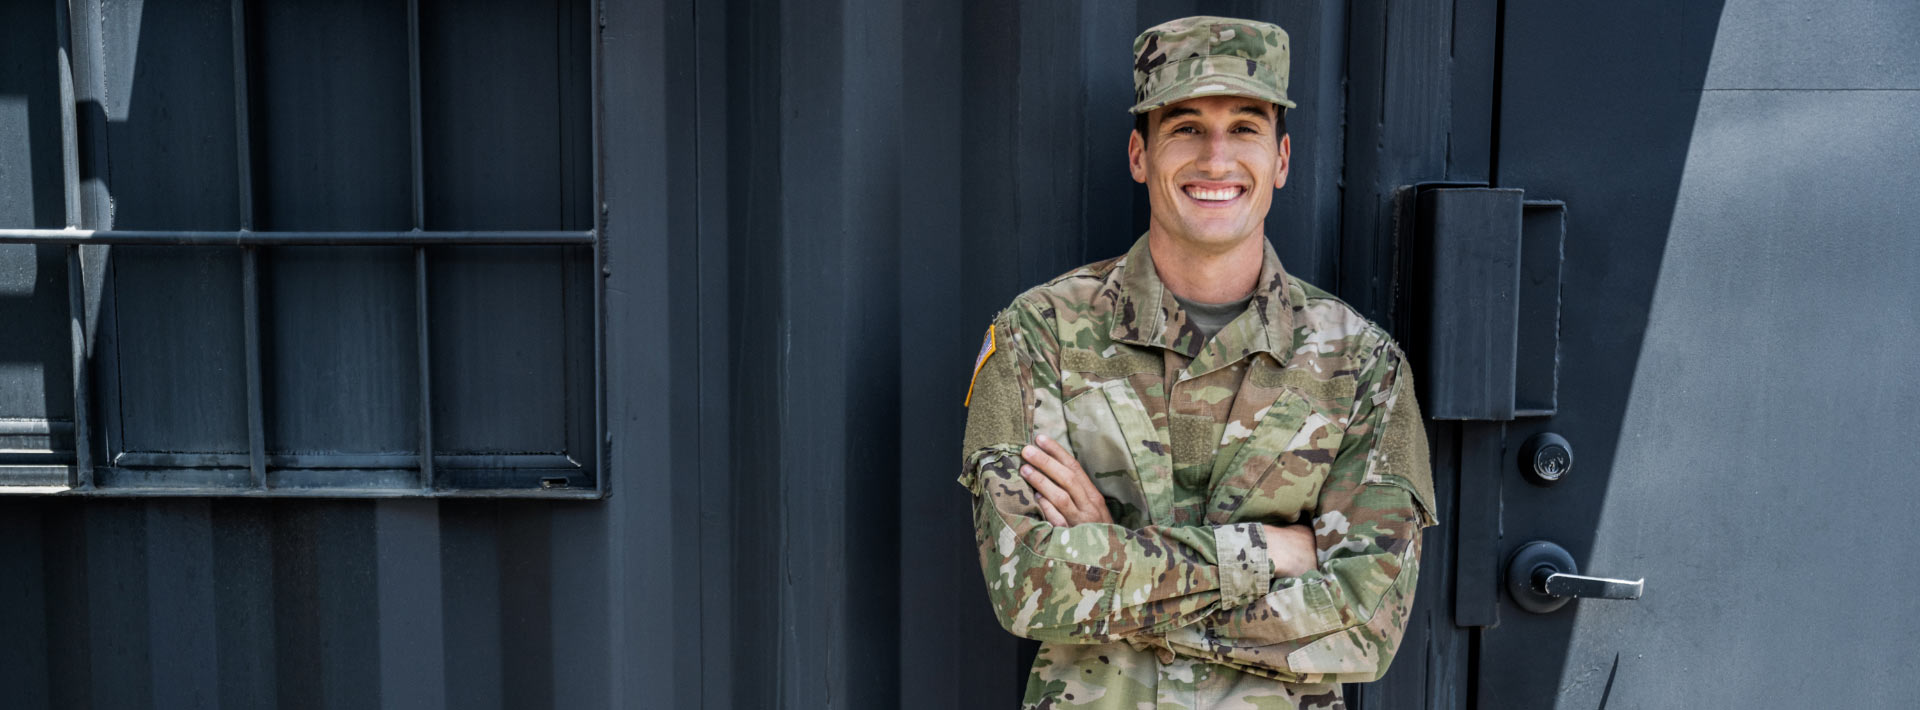 Man in an army uniform stands with his arms crossed in front of a building